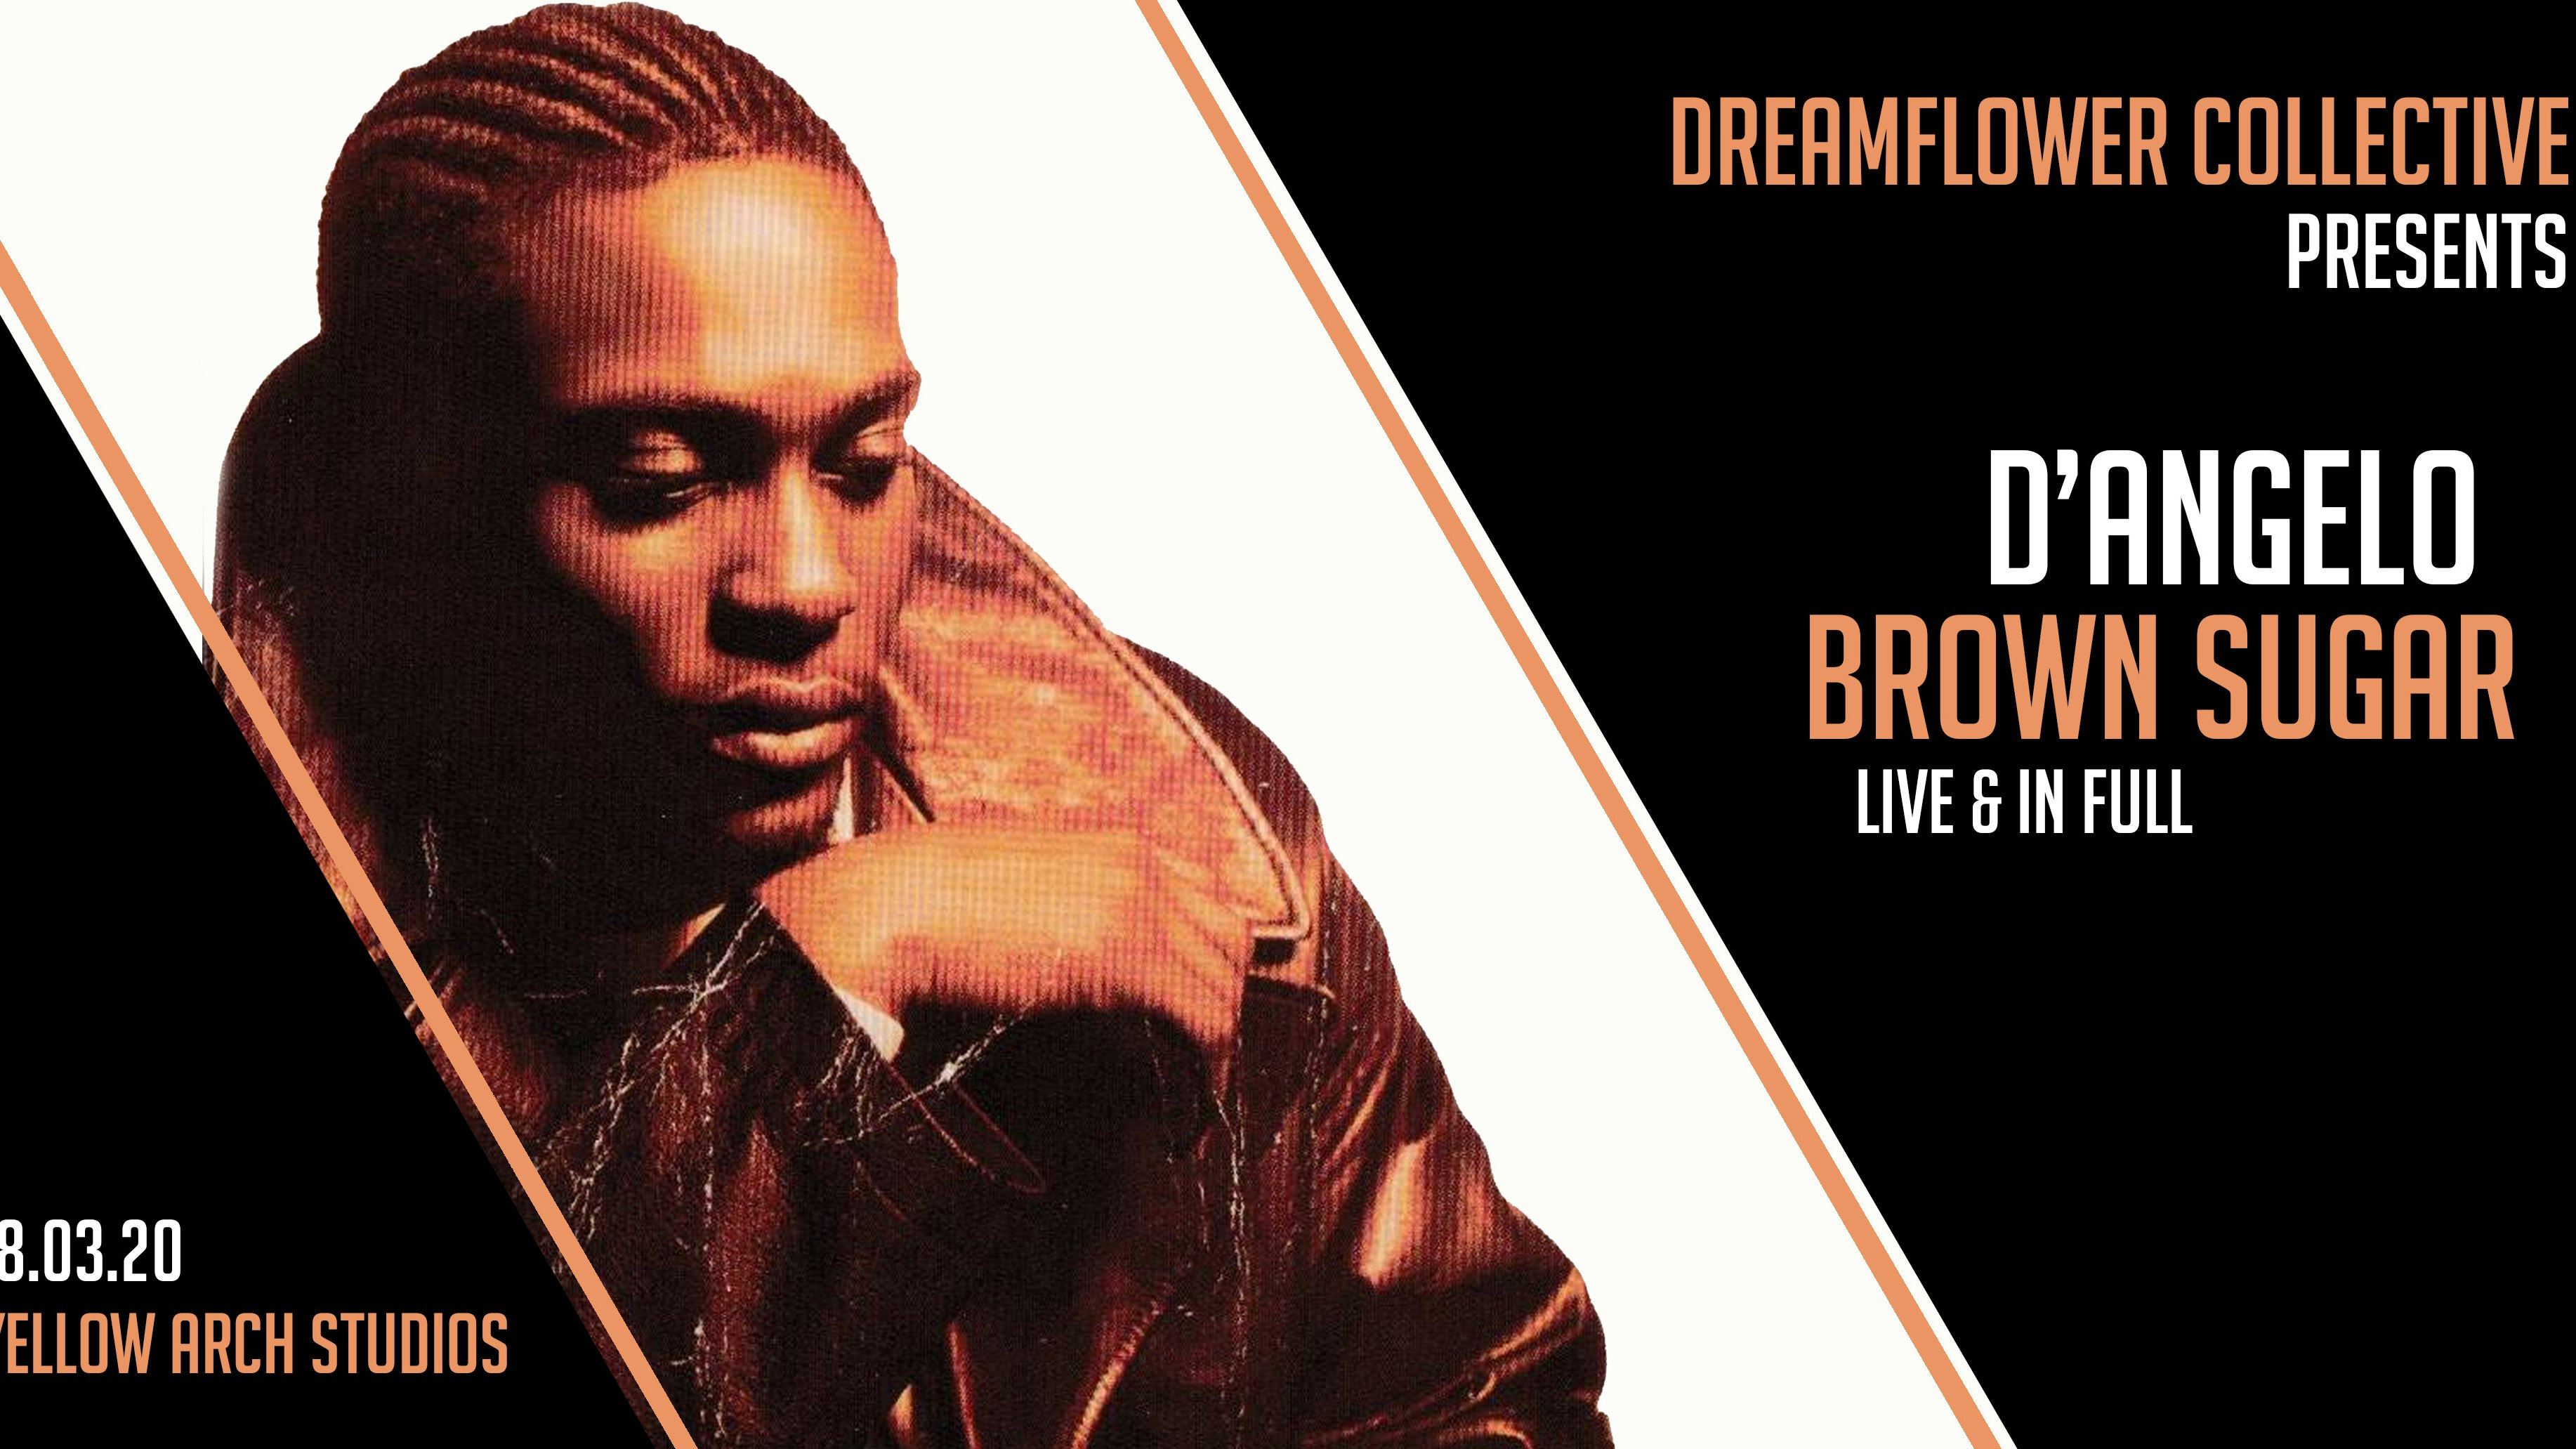 Dreamflower Collective pres. D’Angelo ‘Brown Sugar’ live